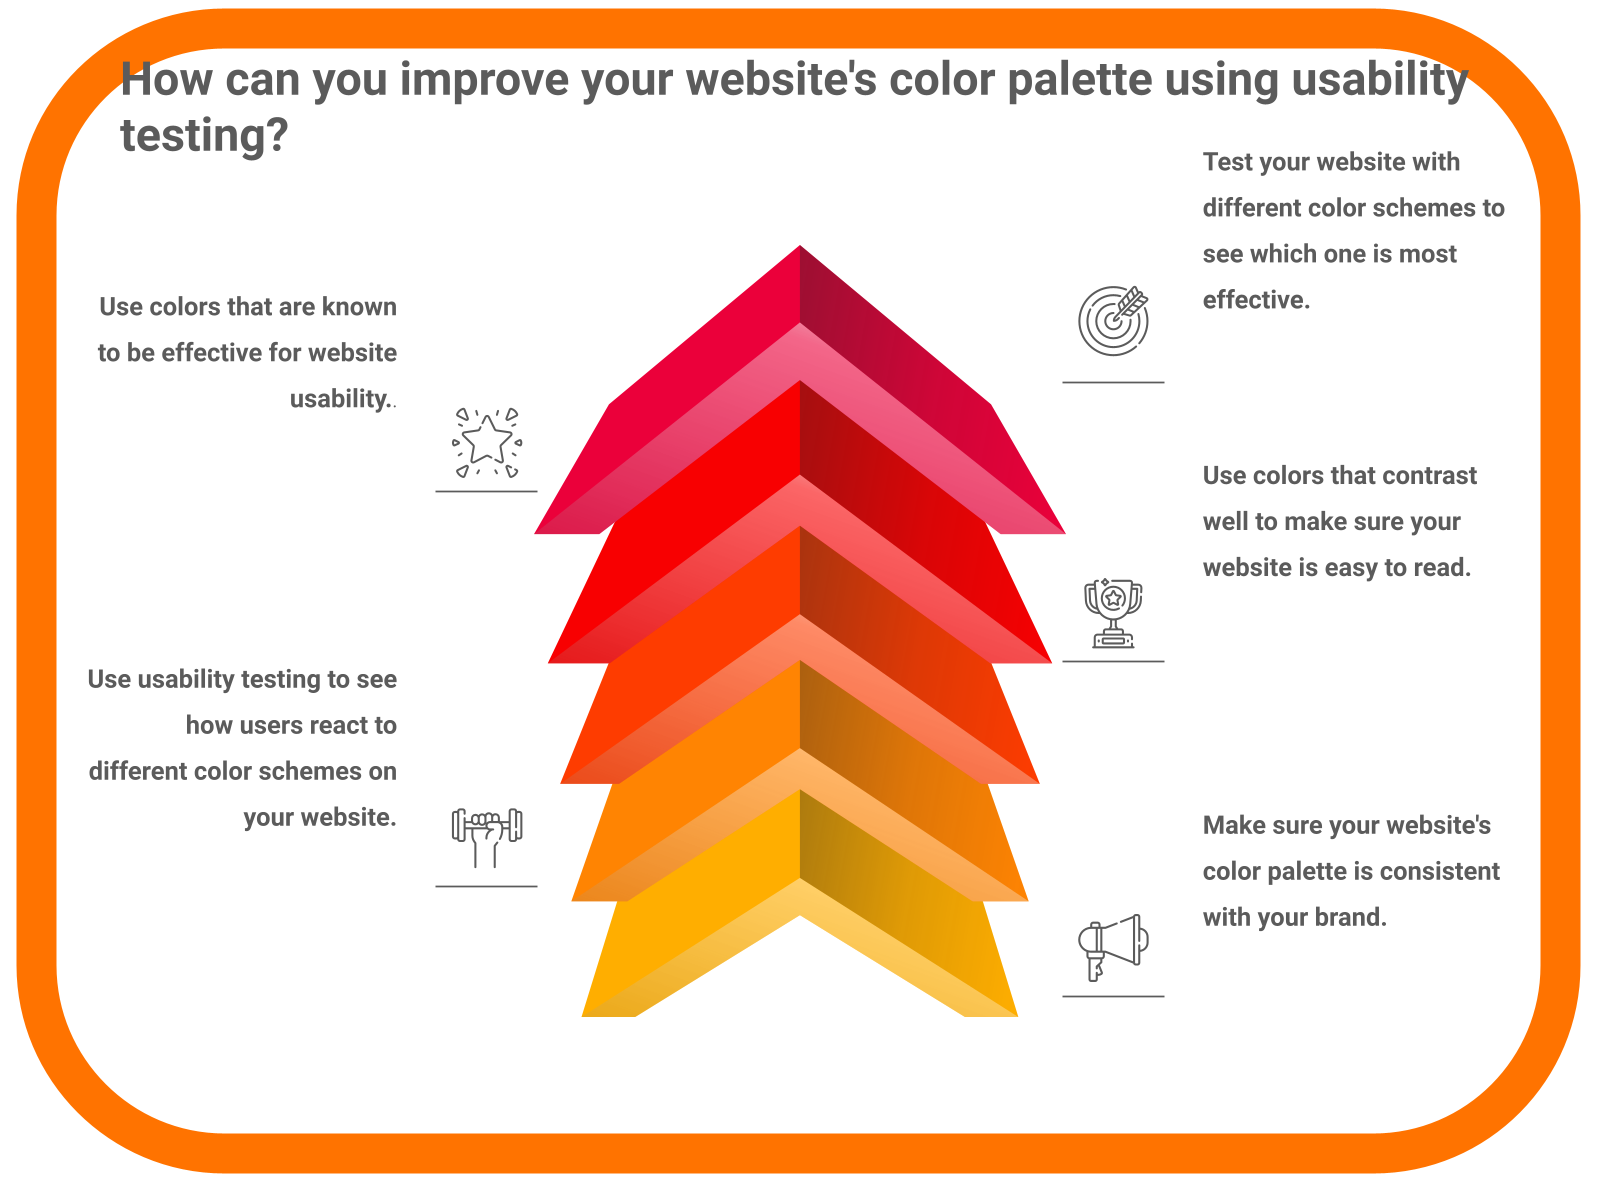 How can you improve your website’s color scheme using usability testing?